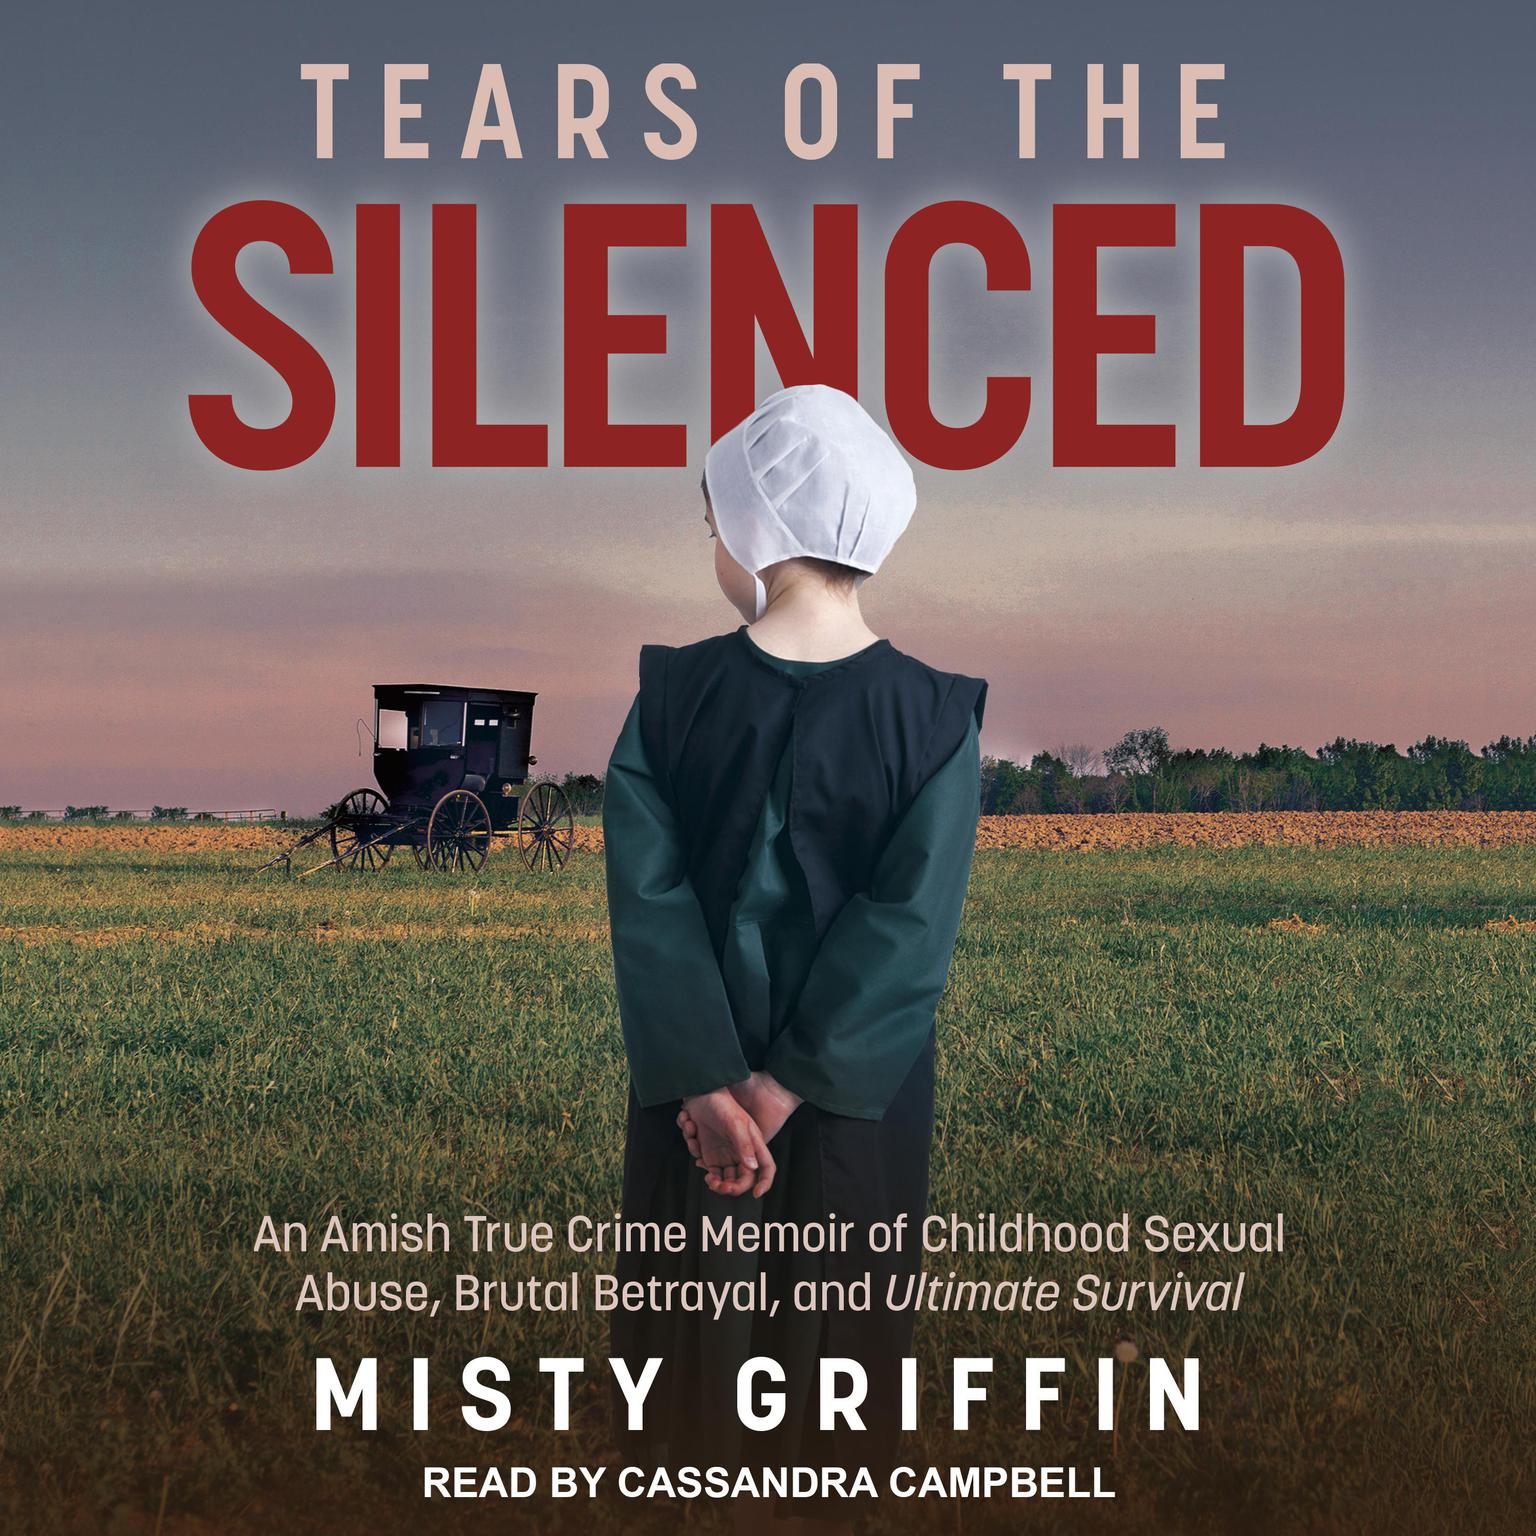 Tears of the Silenced: An Amish True Crime Memoir of Childhood Sexual Abuse, Brutal Betrayal, and Ultimate Survival Audiobook, by Misty Griffin